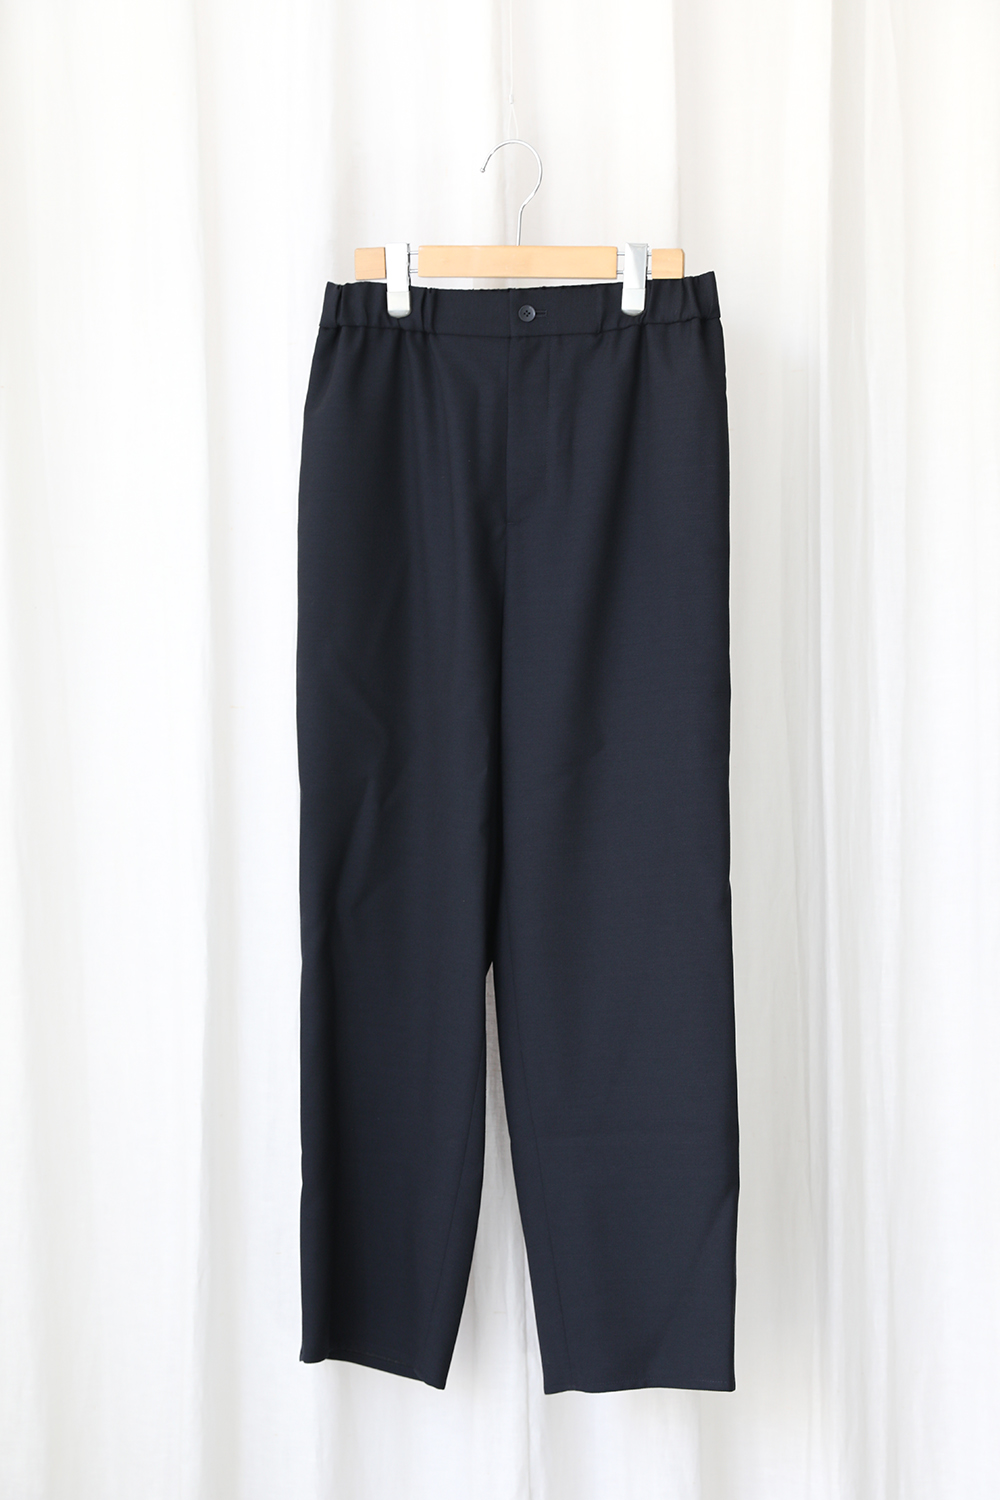 WOOL CARAMEL PIQUET TAPERED EASY PANTS